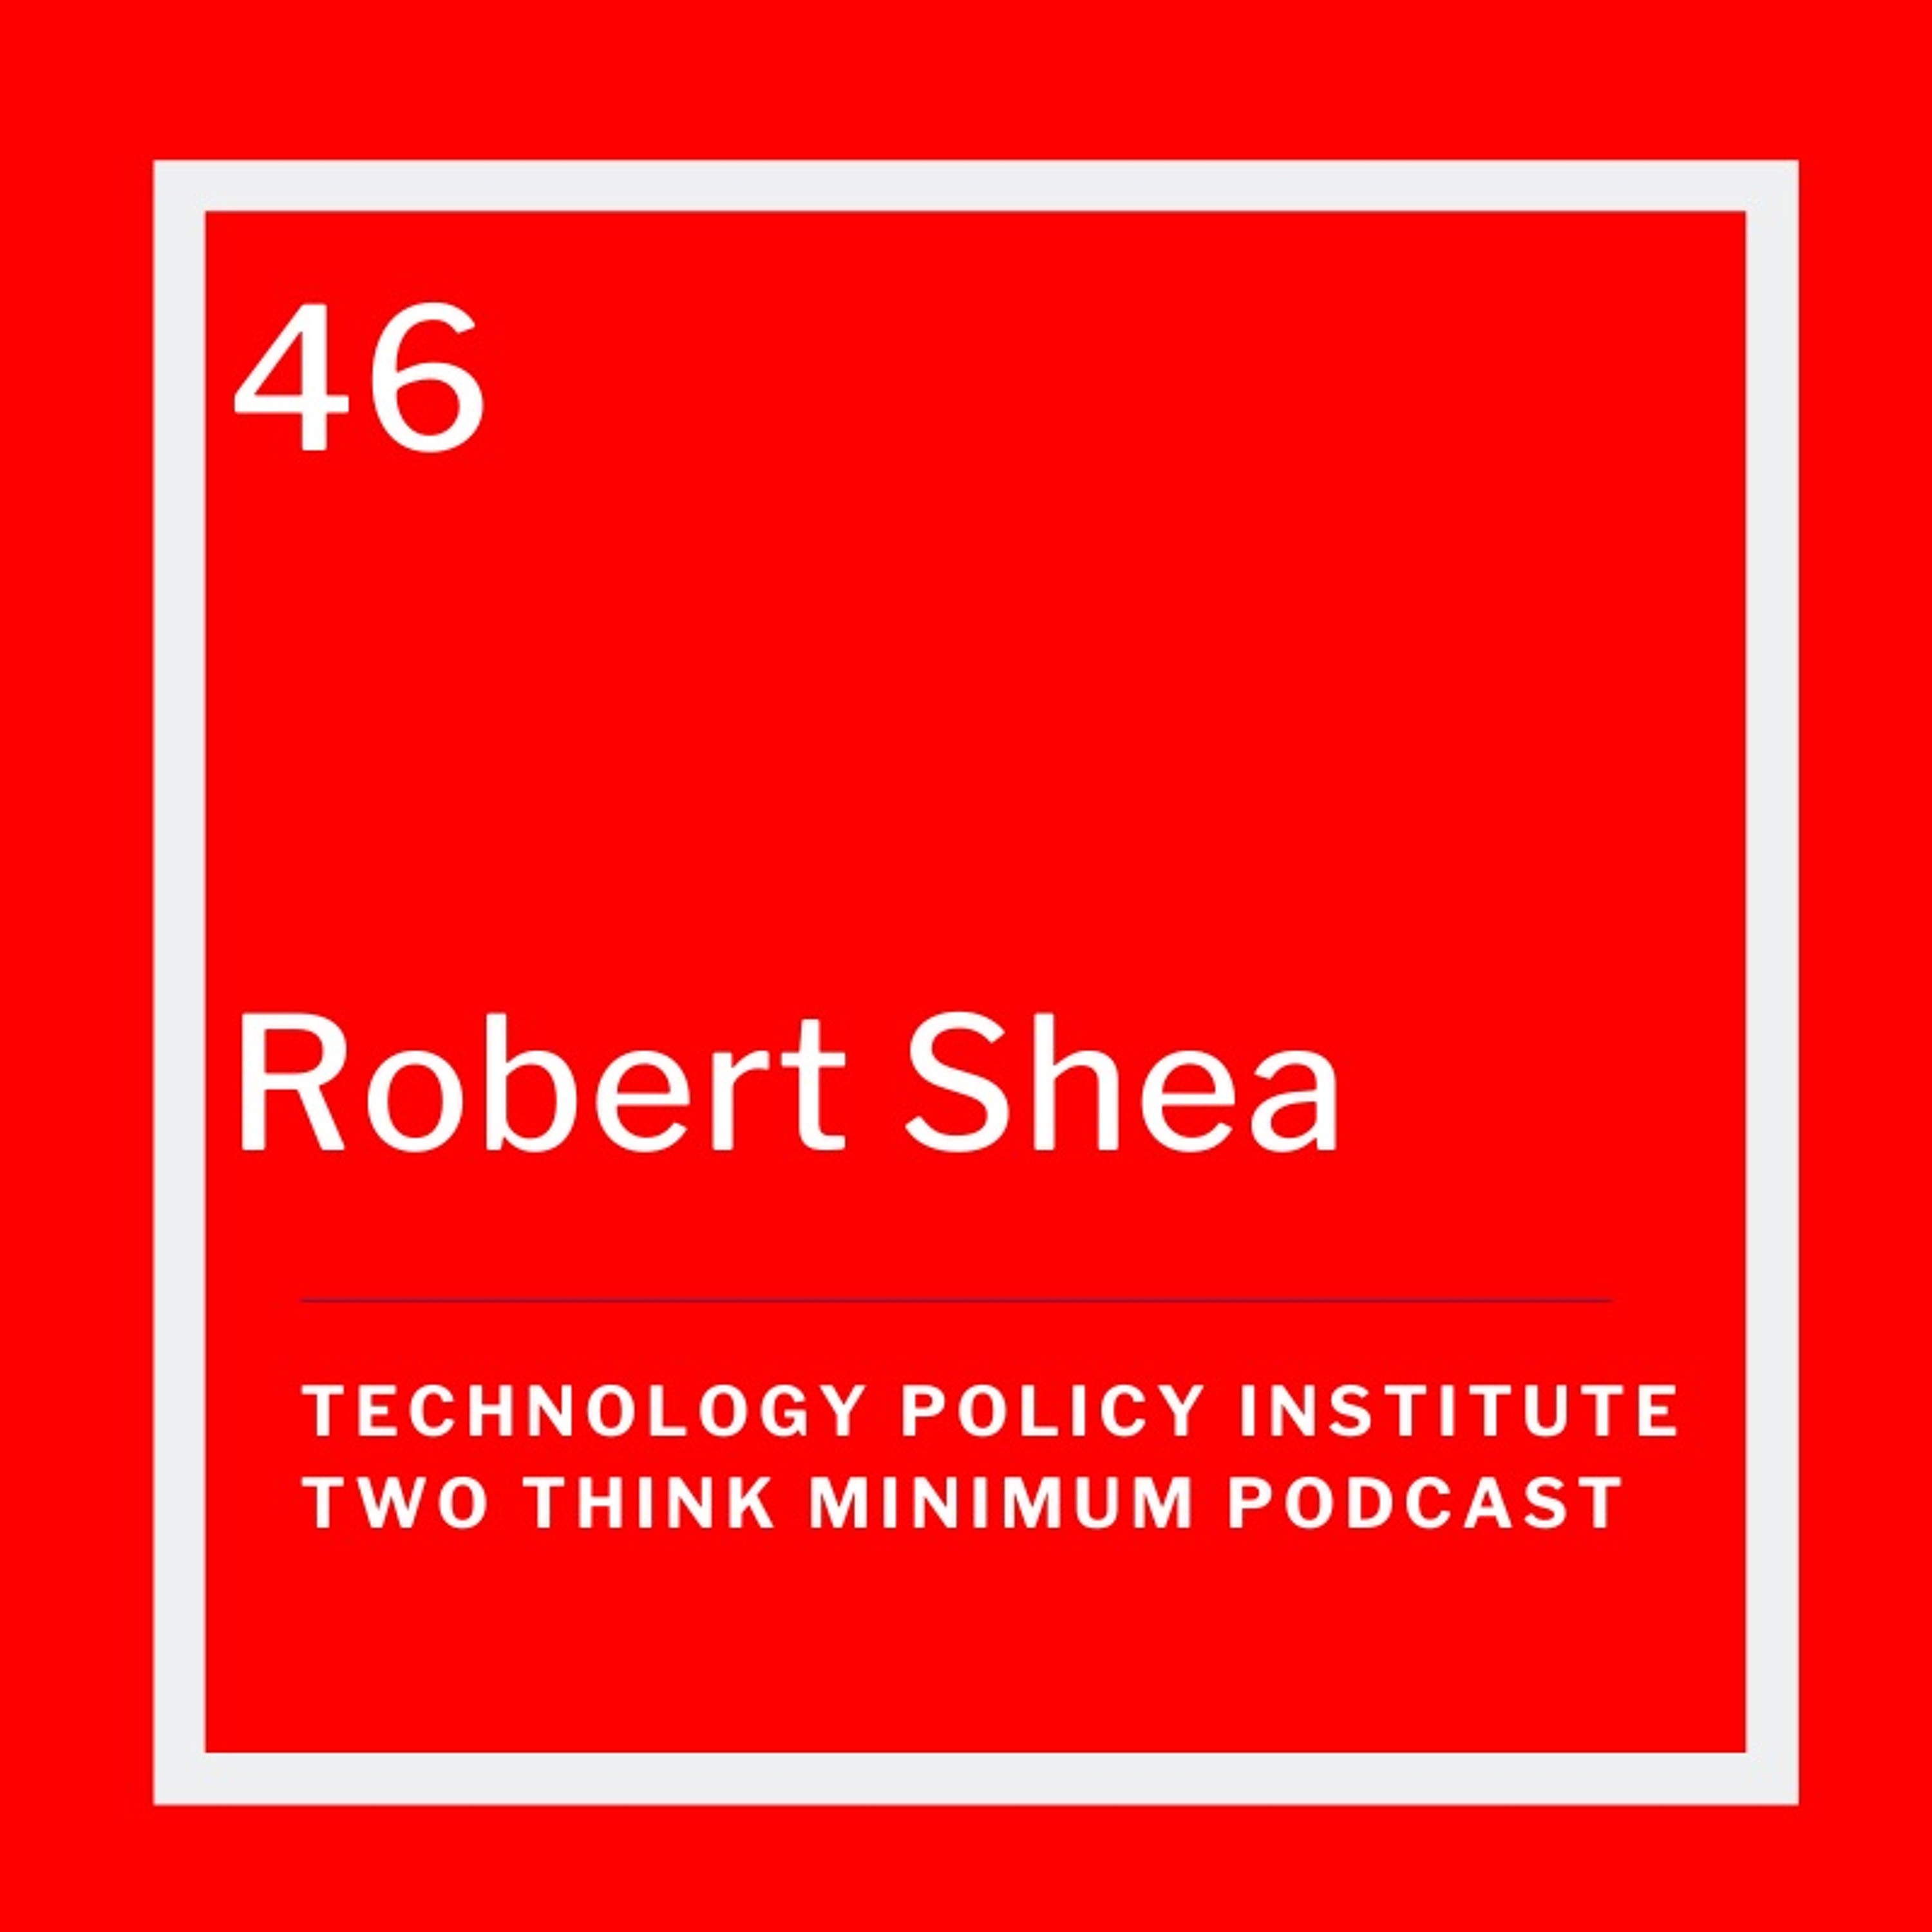 Robert Shea on Evidence Based Policy’s Impact and Potential